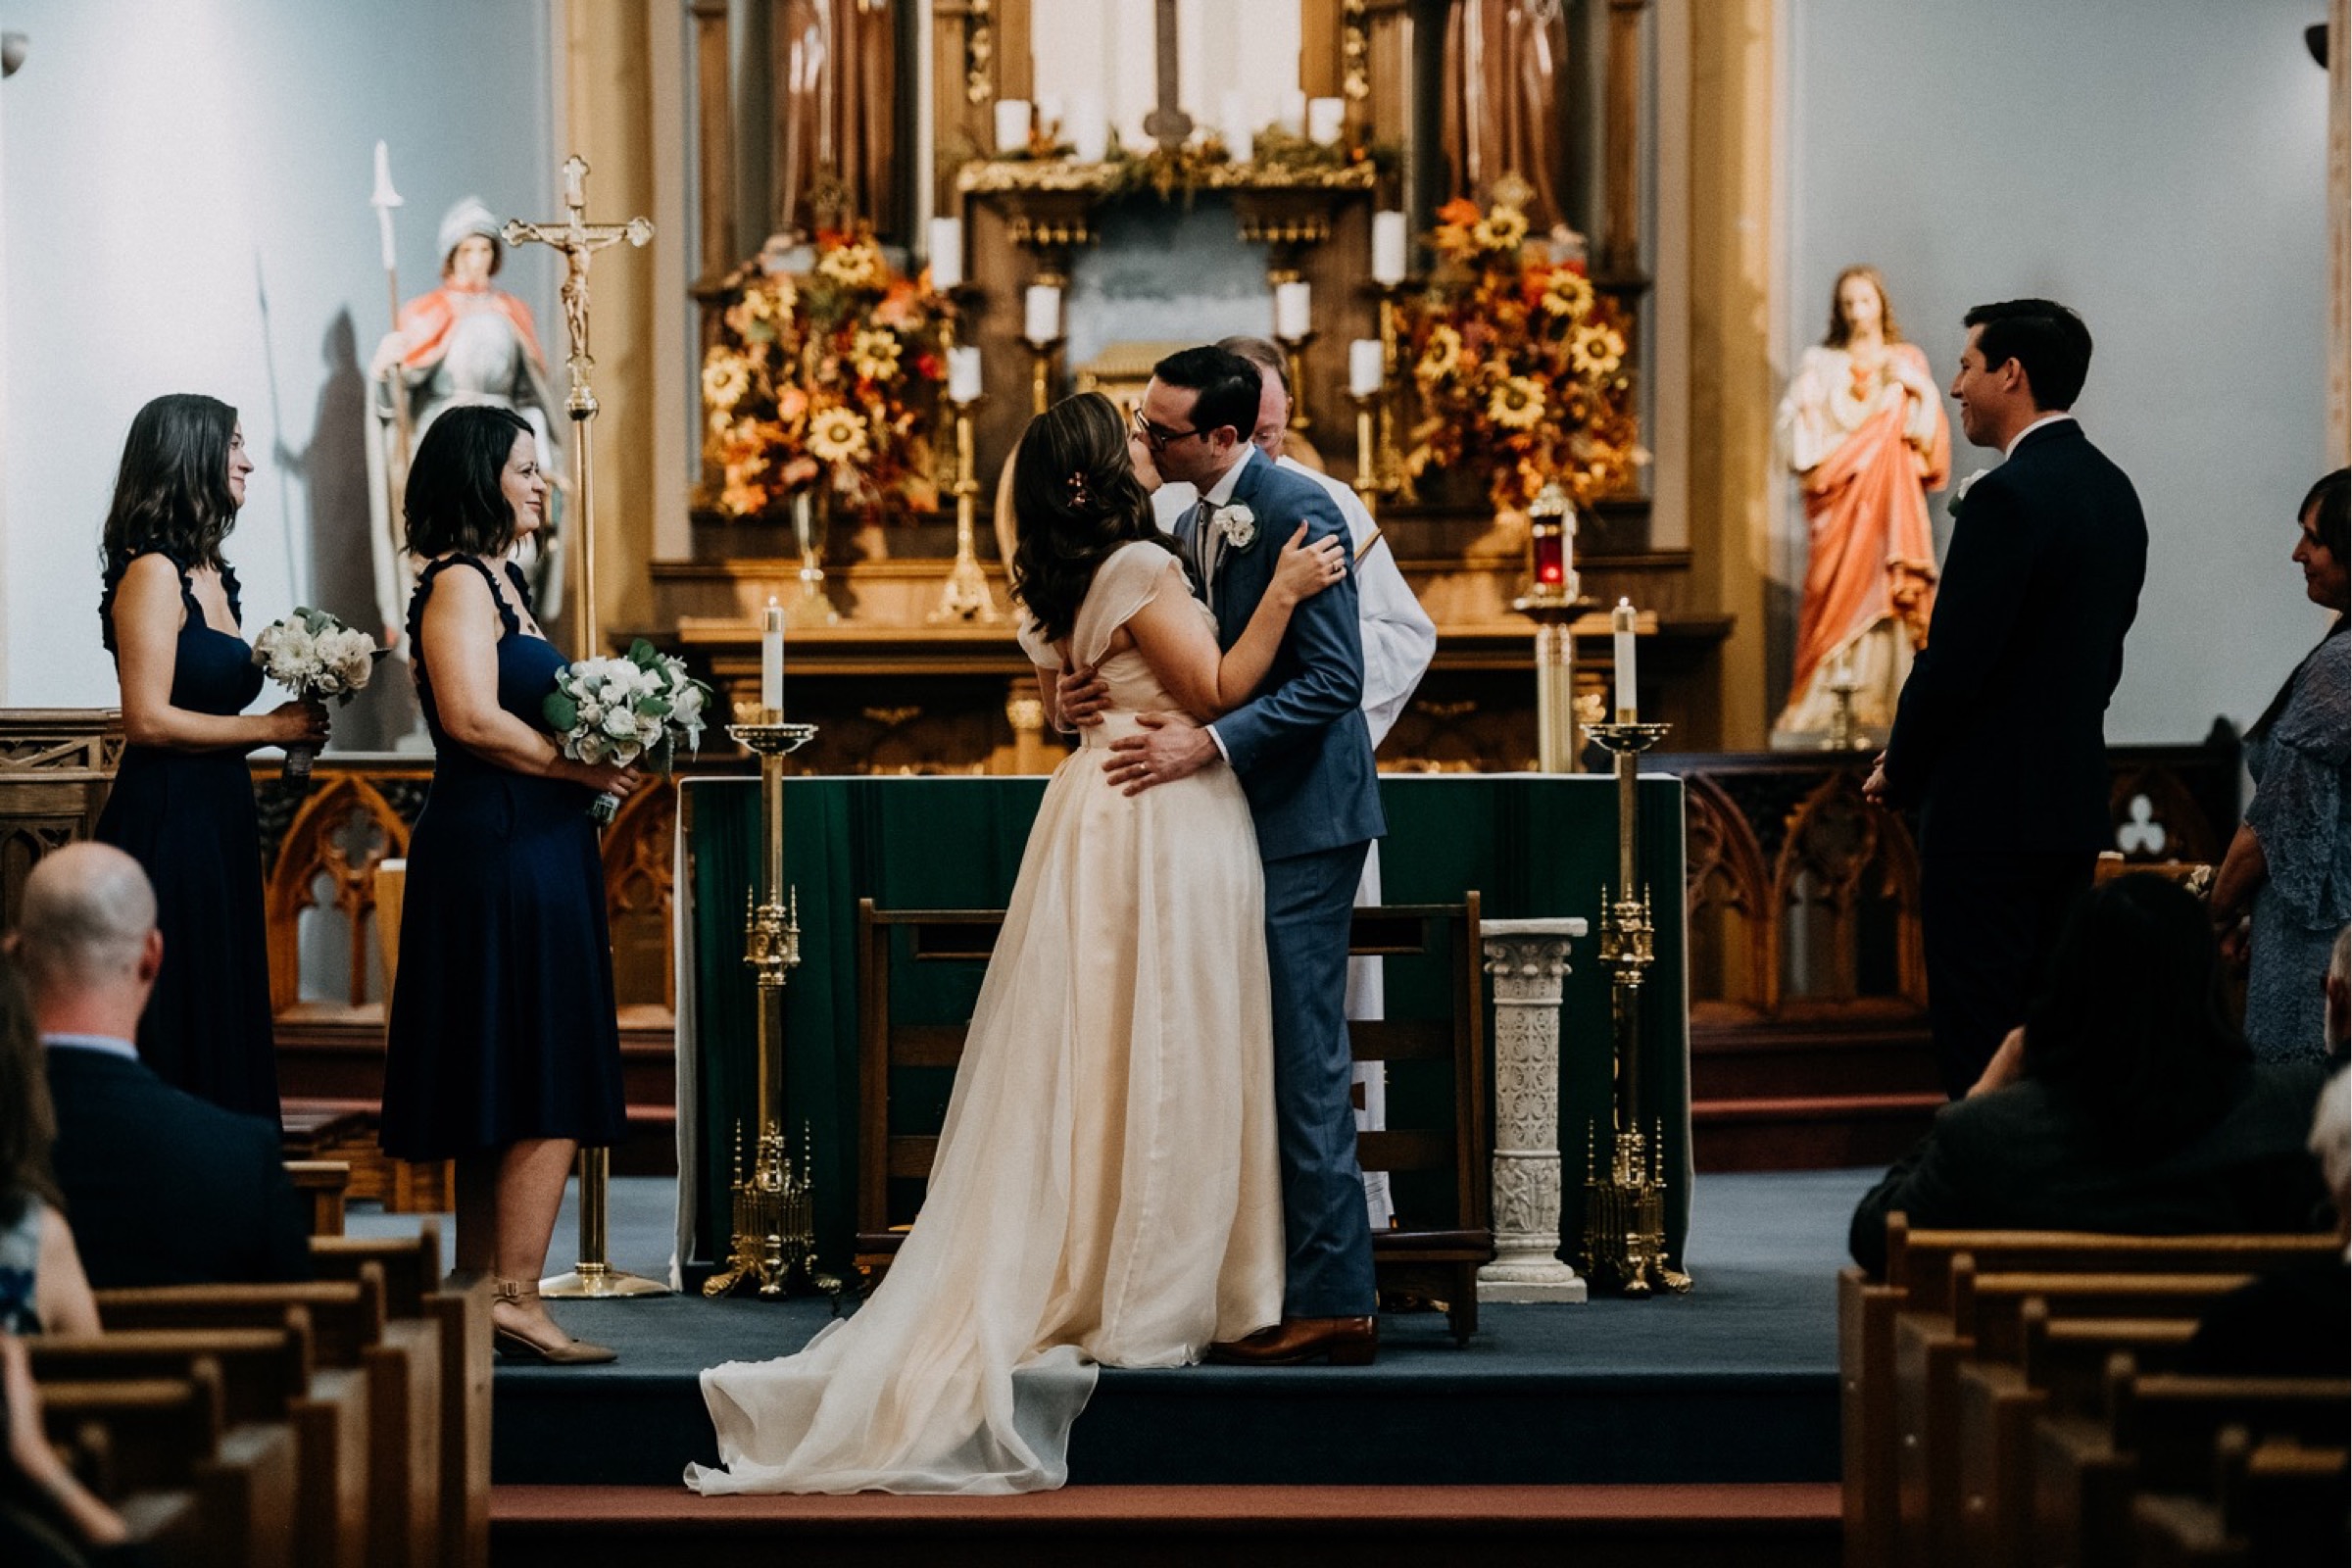 A couple have their first kiss in a historic old church in Hermann, MO during the ceremony portion of their wedding day timeline